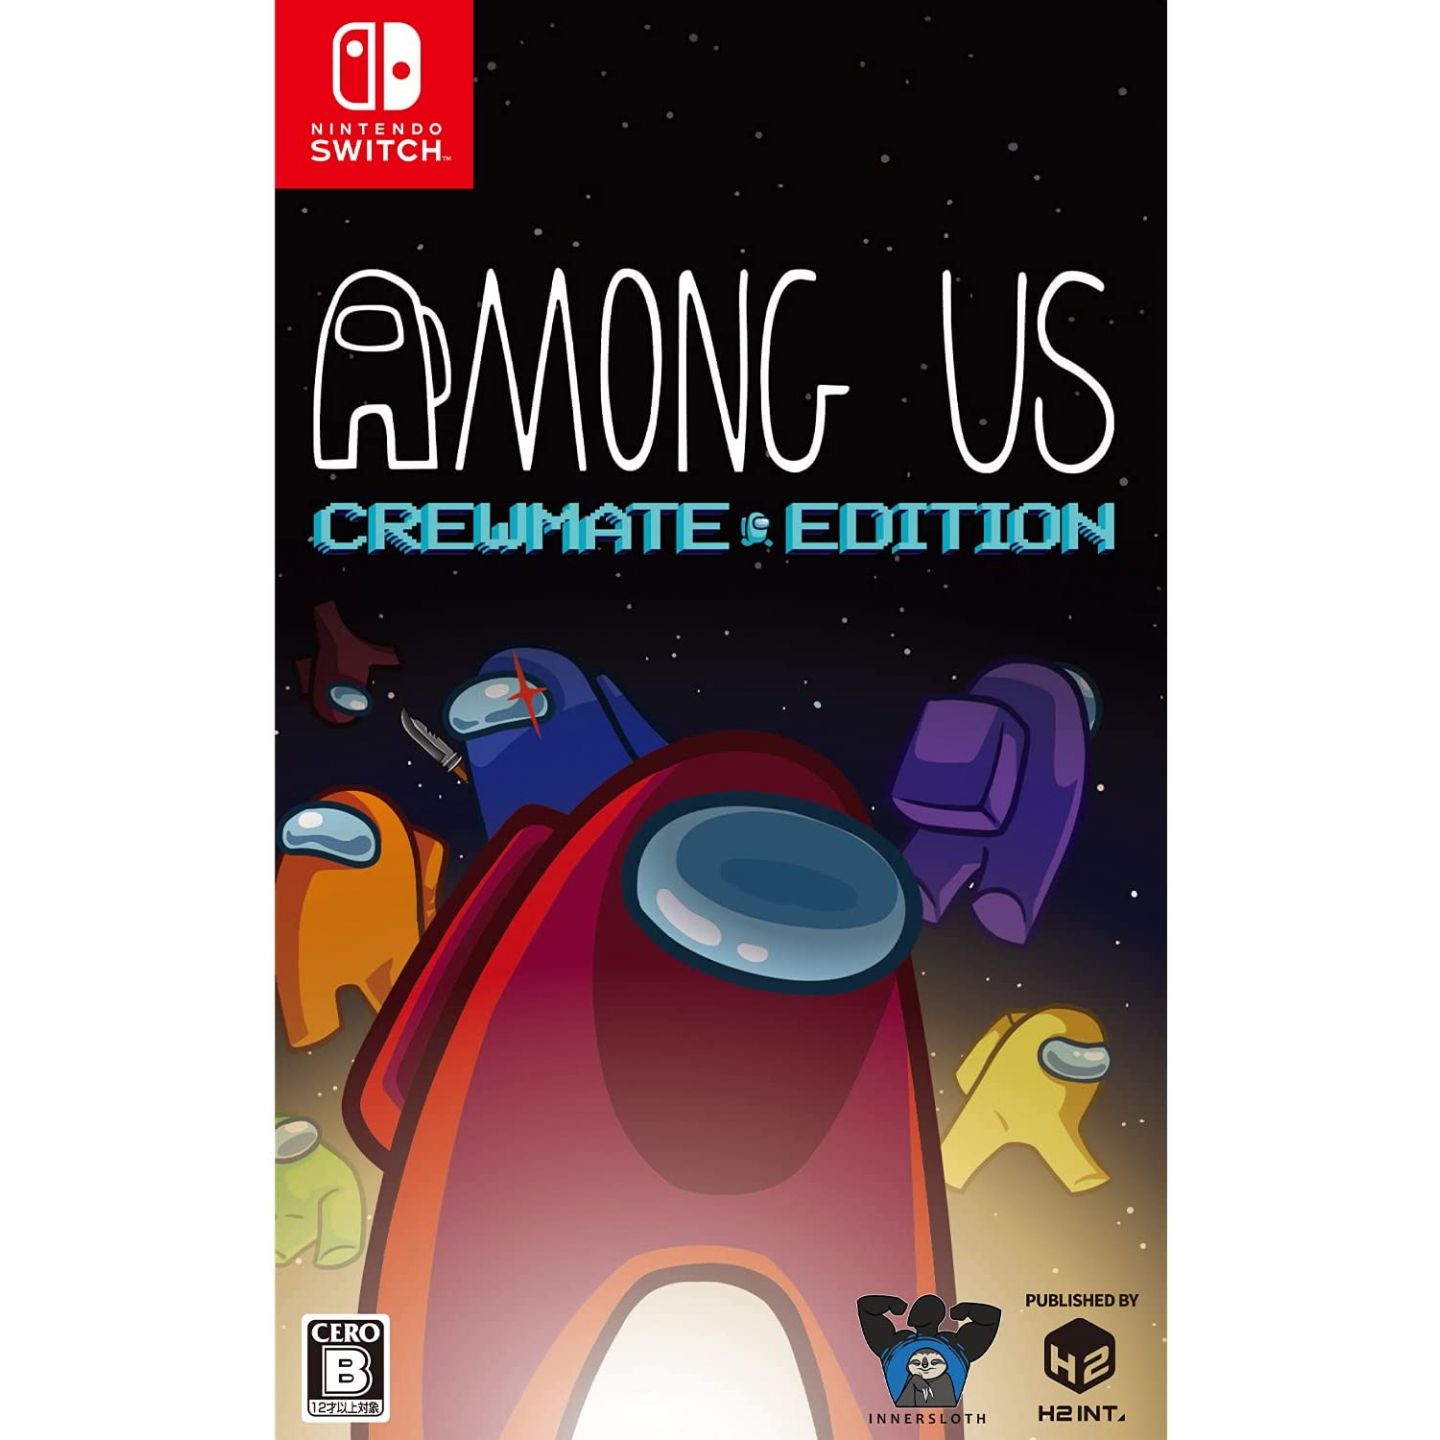 Among Us is now available on the Nintendo Switch